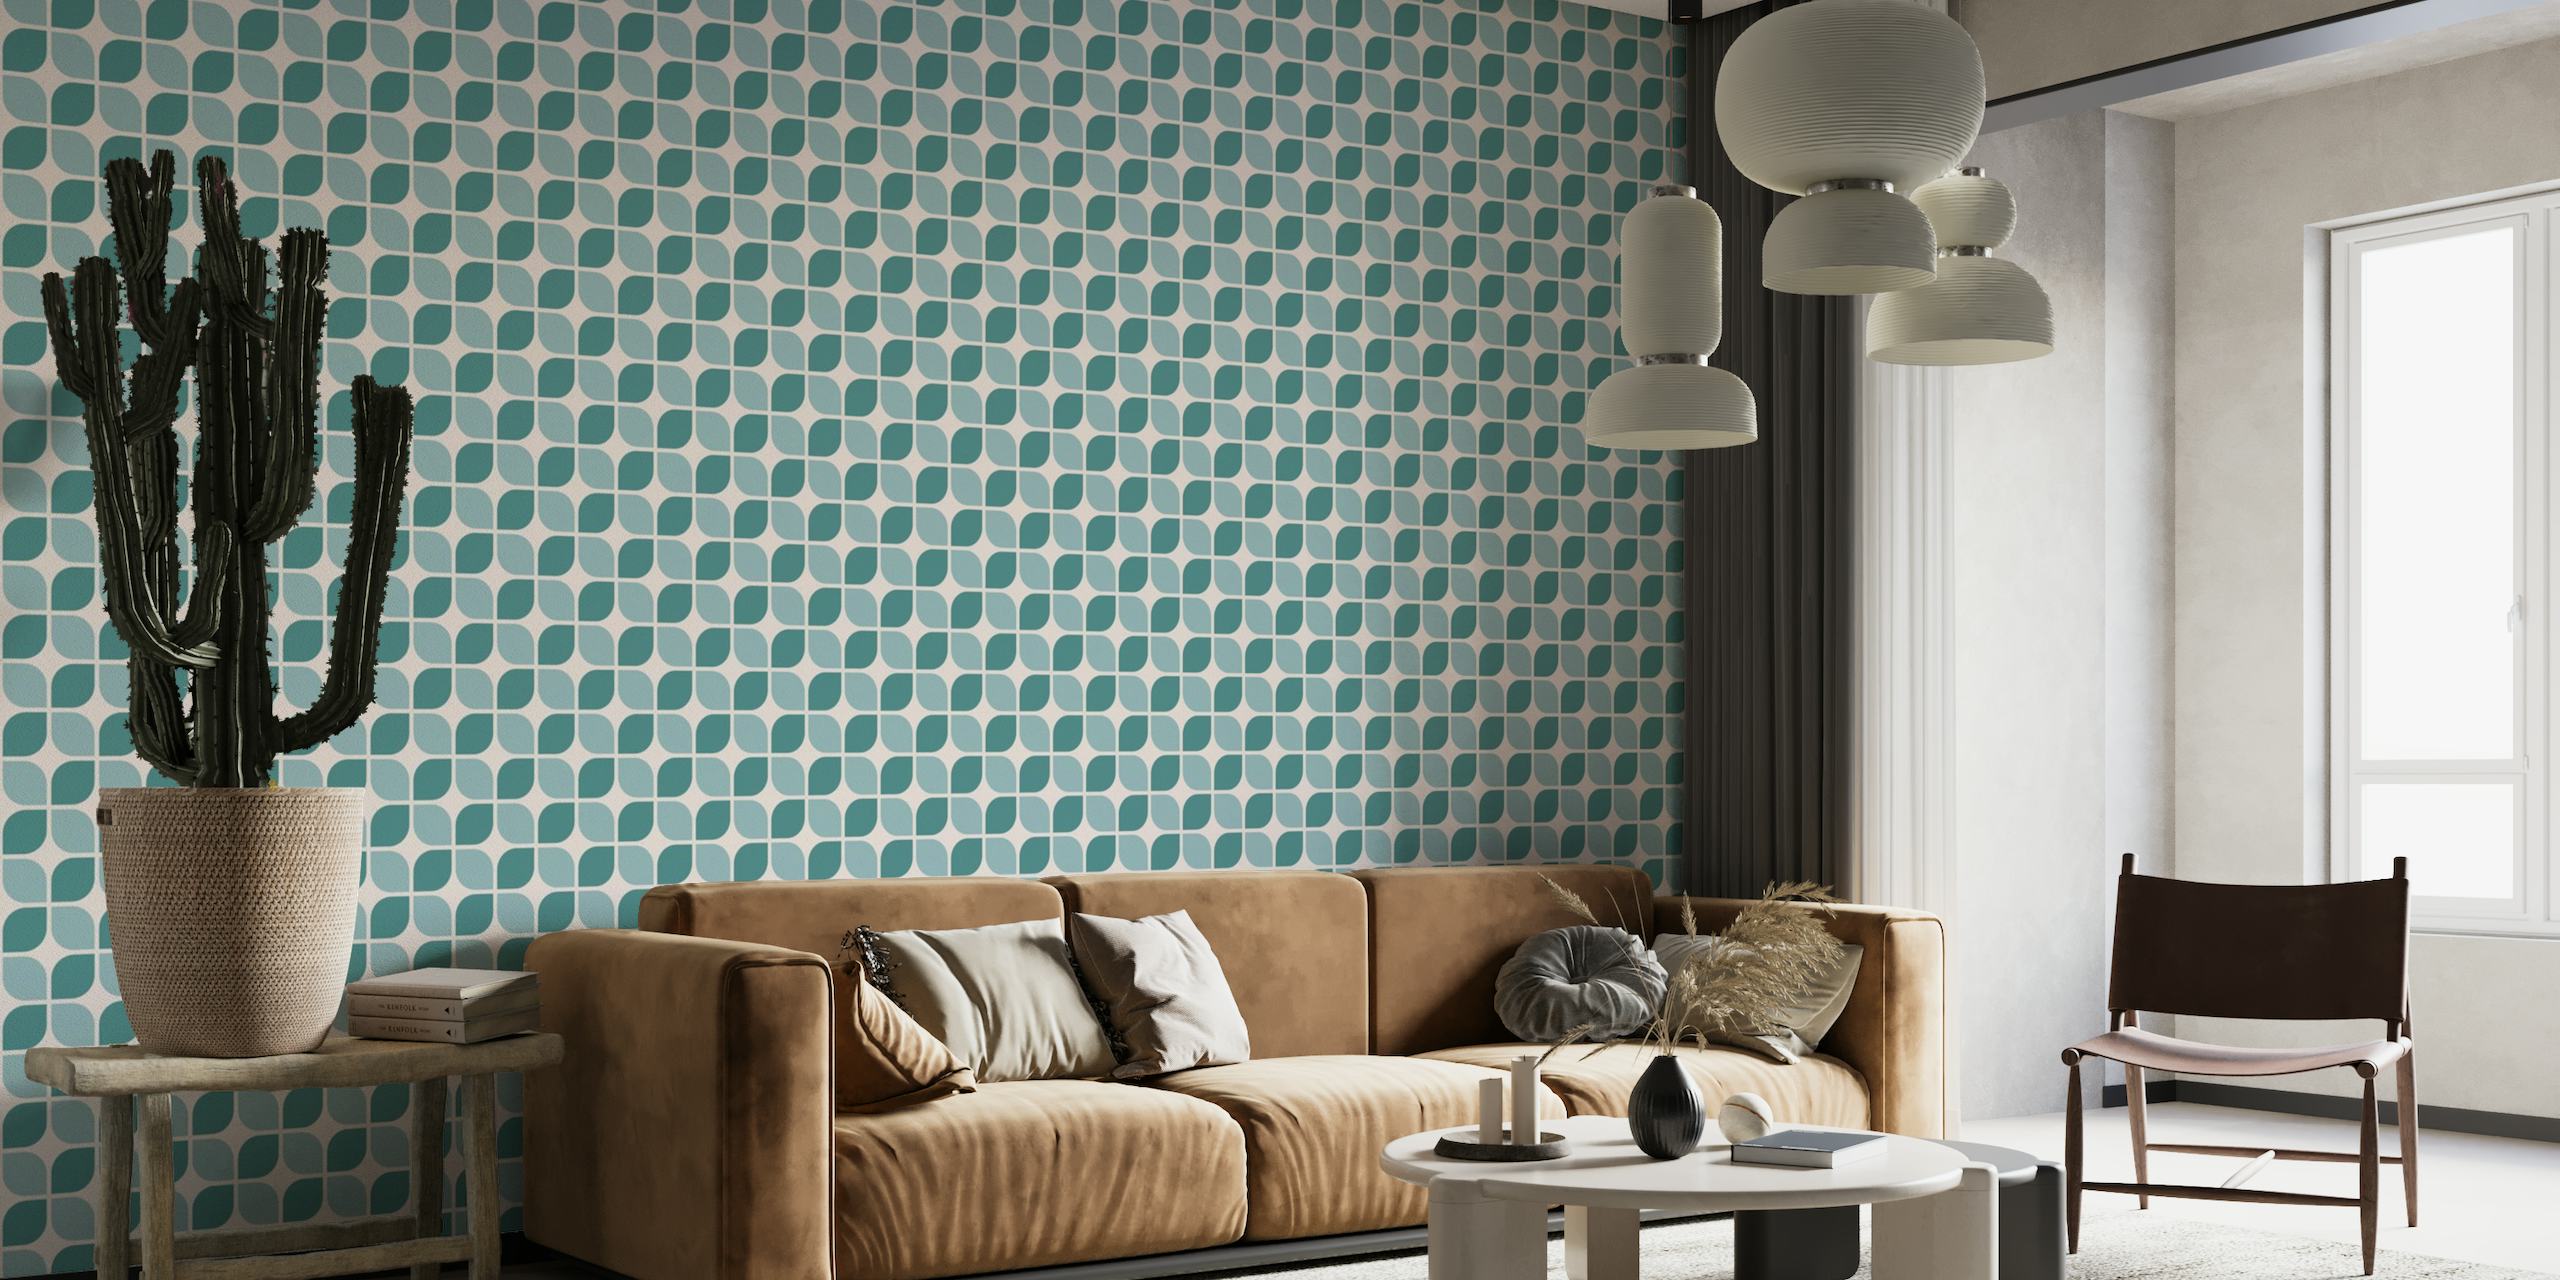 Retro Shapes Pattern Teal Turquoise behang